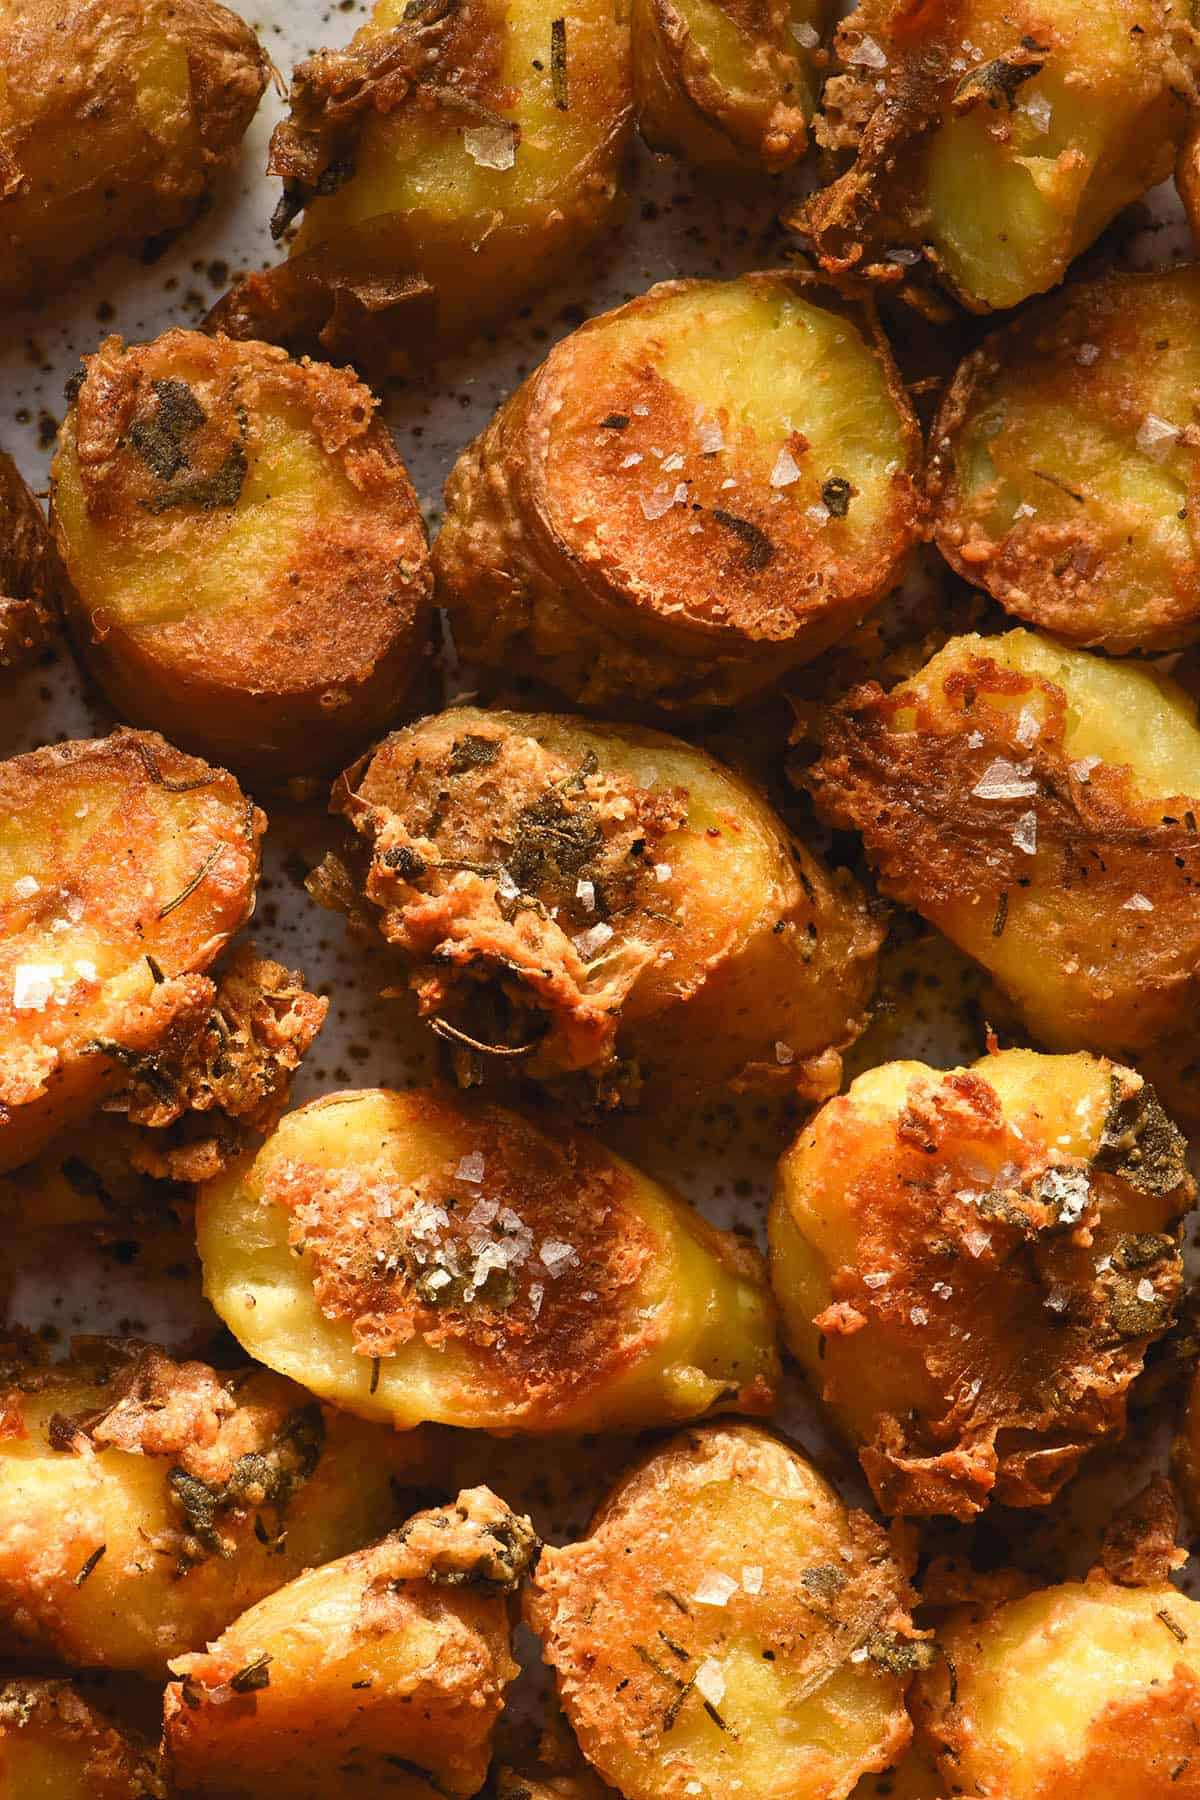 An aerial macro image of a plate of roasted kipfler potatoes with a herb and parmesan crust. The potatoes are golden brown and topped with sea salt flakes